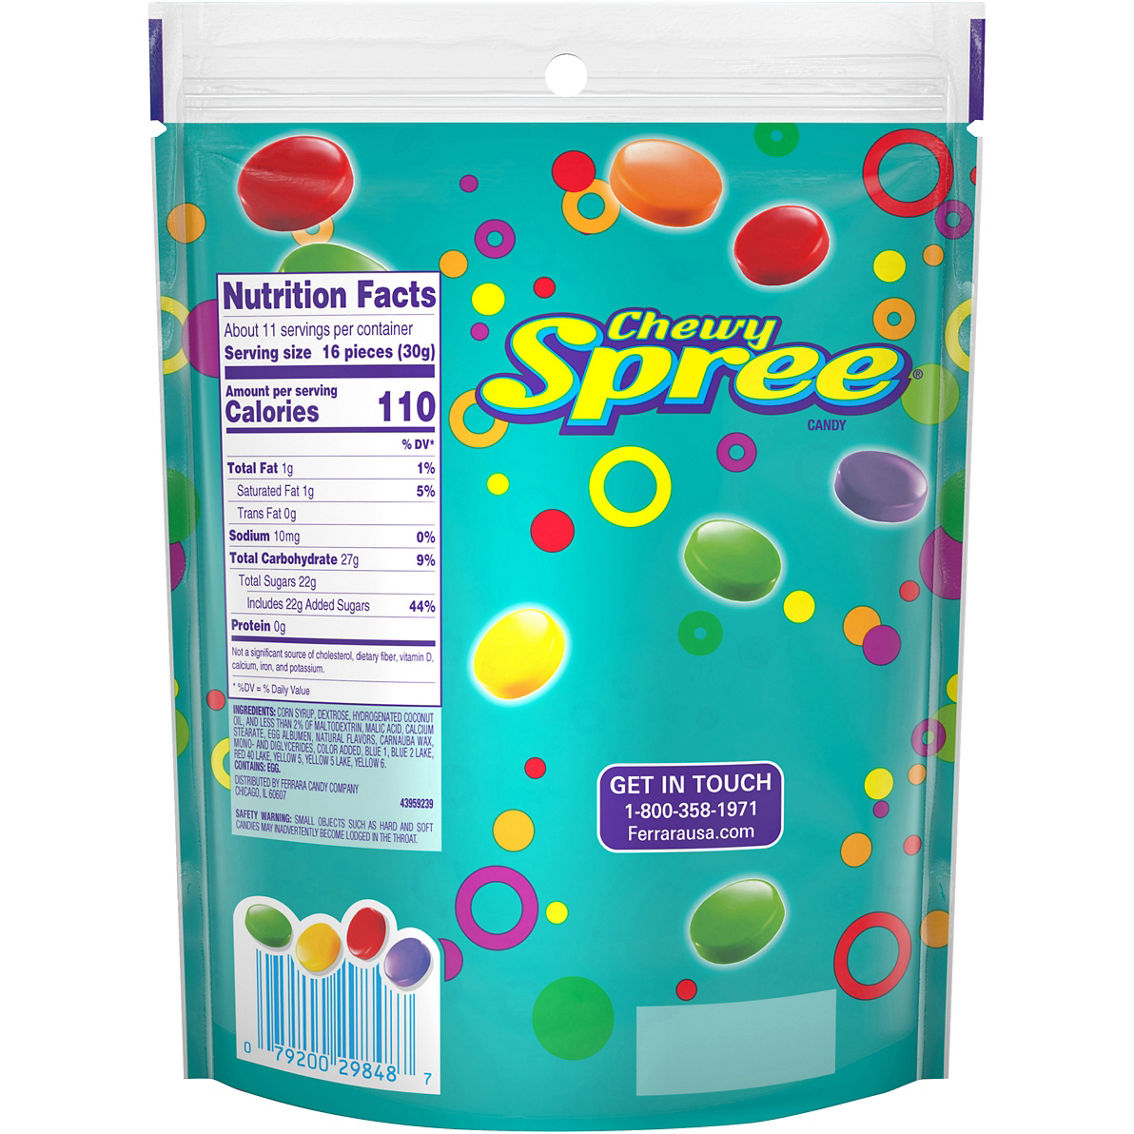 Spree Chewy Candy 12 oz. Bag - Image 2 of 3